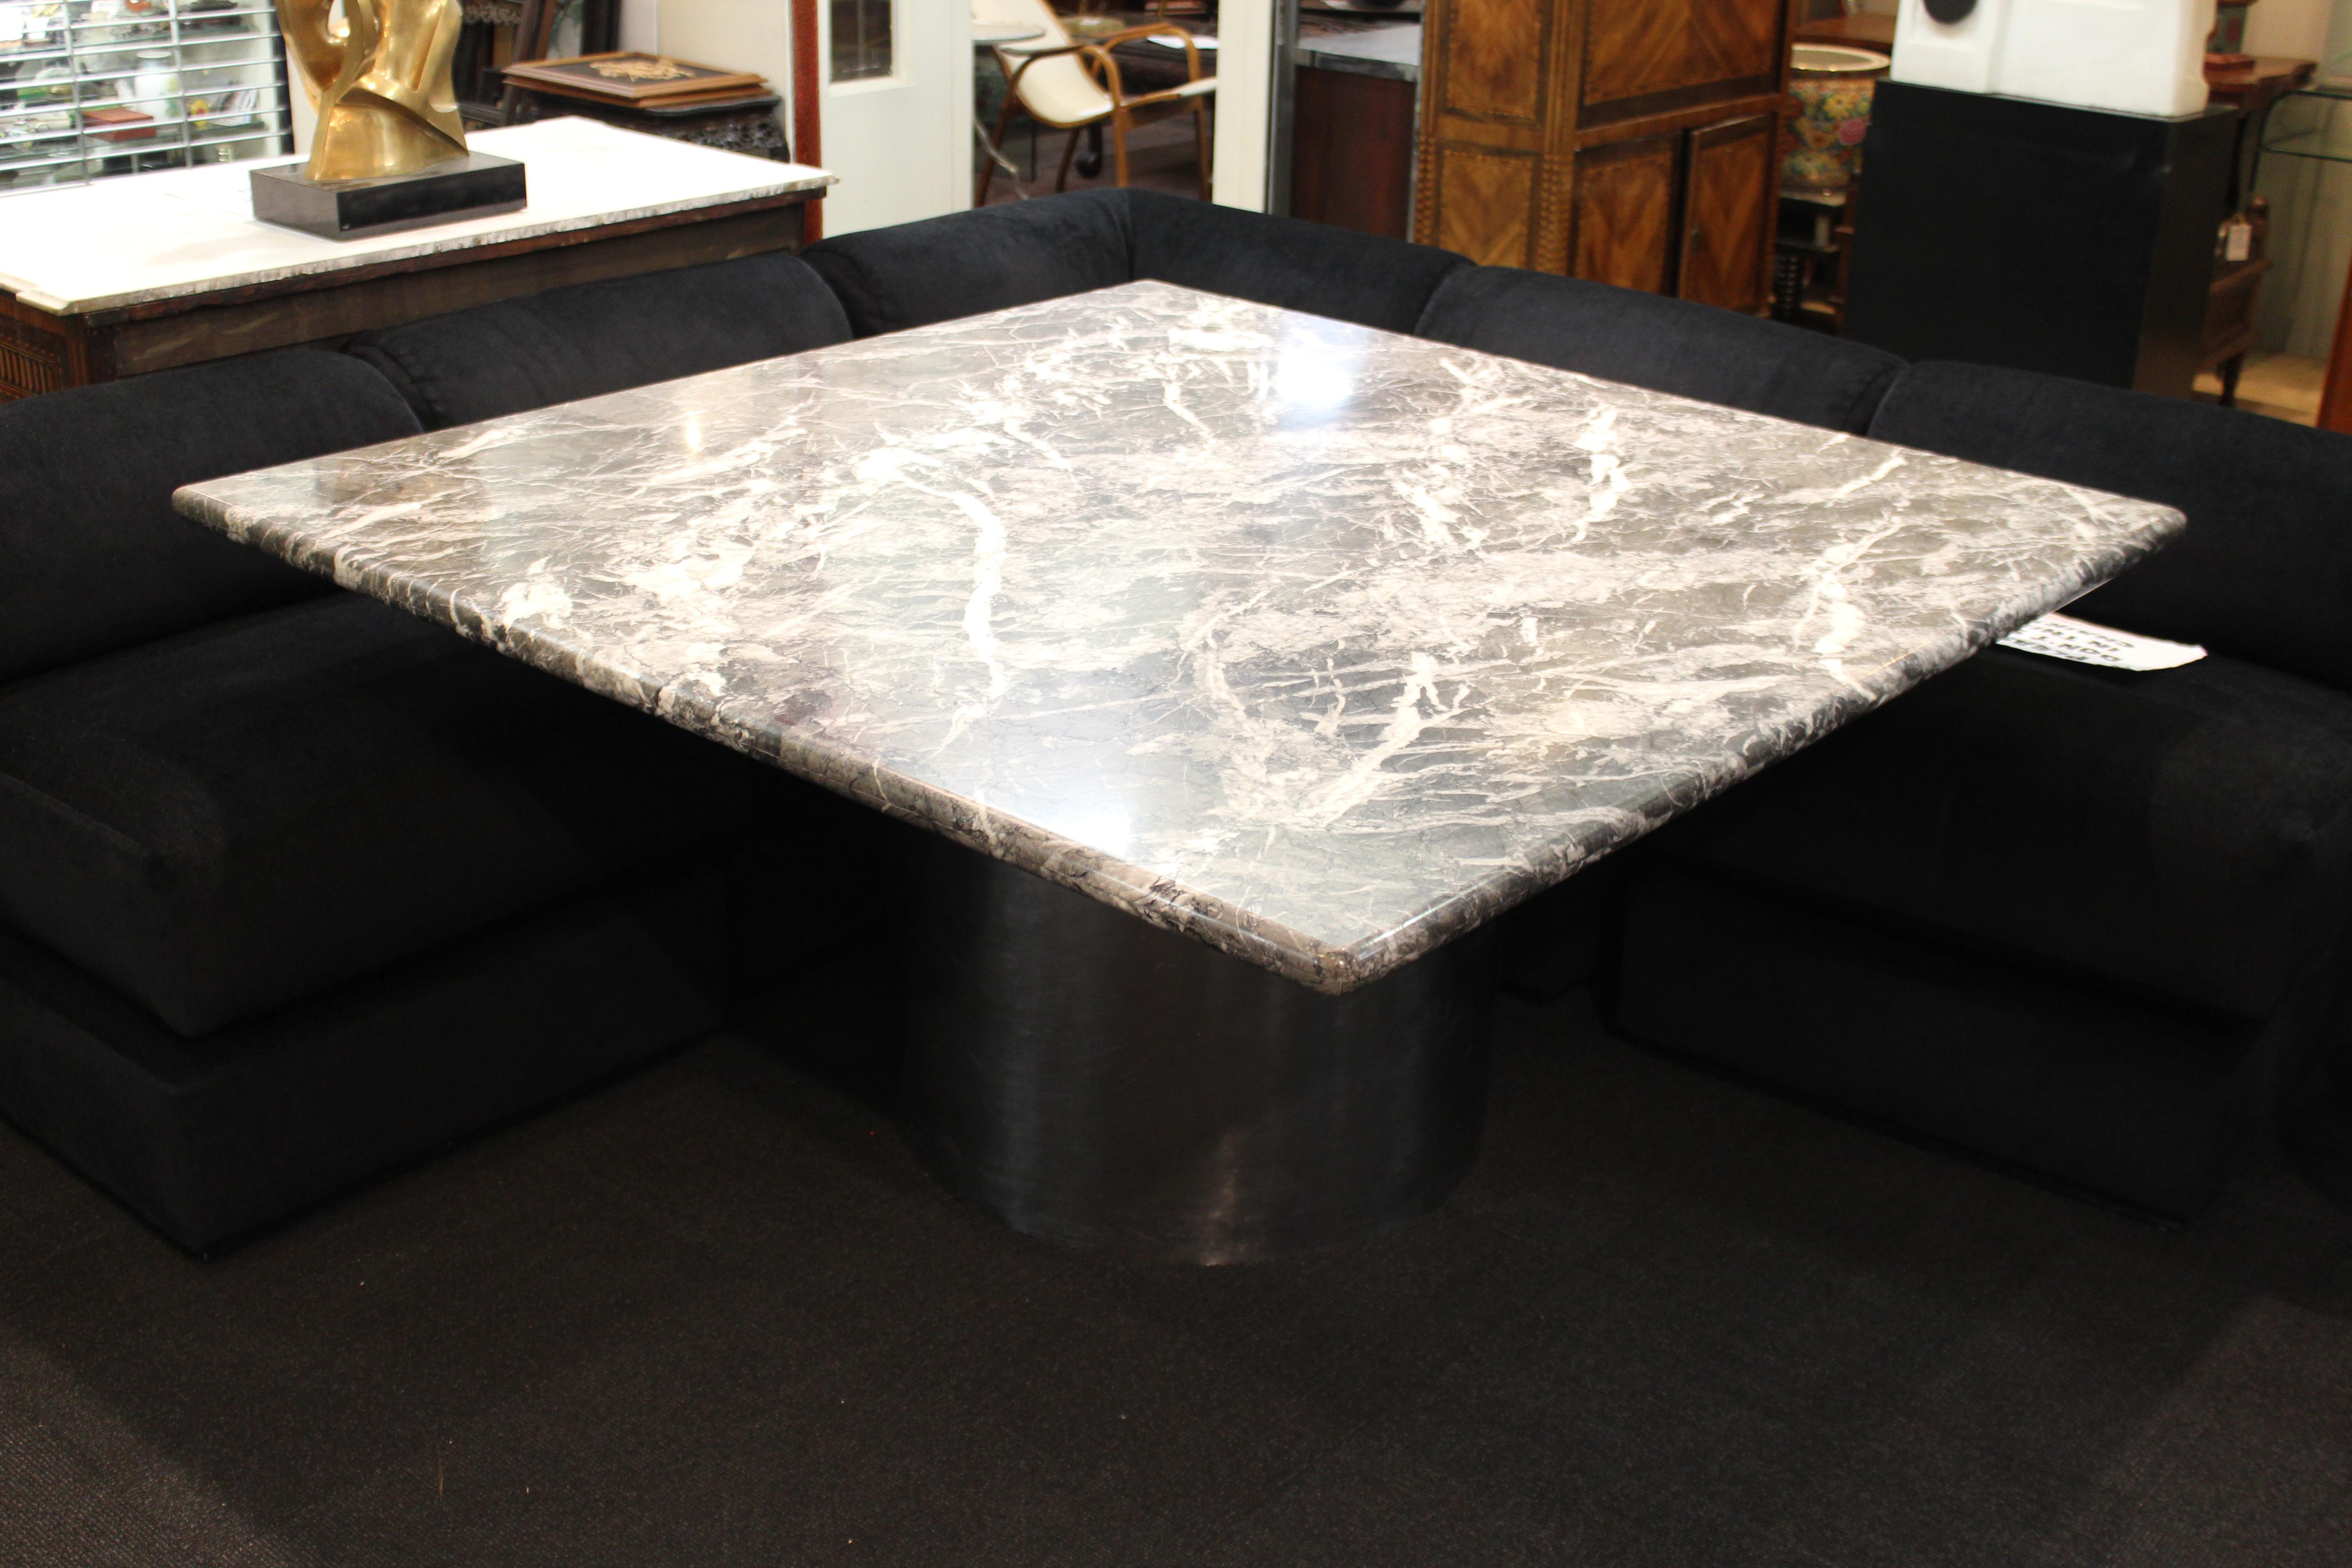 Modern custom made dining table or center table, custom made with a heavy square veined dark marble top on a circular chromed metal base. The piece is in the style of Brueton and was likely custom made during the late 20th century. In great vintage